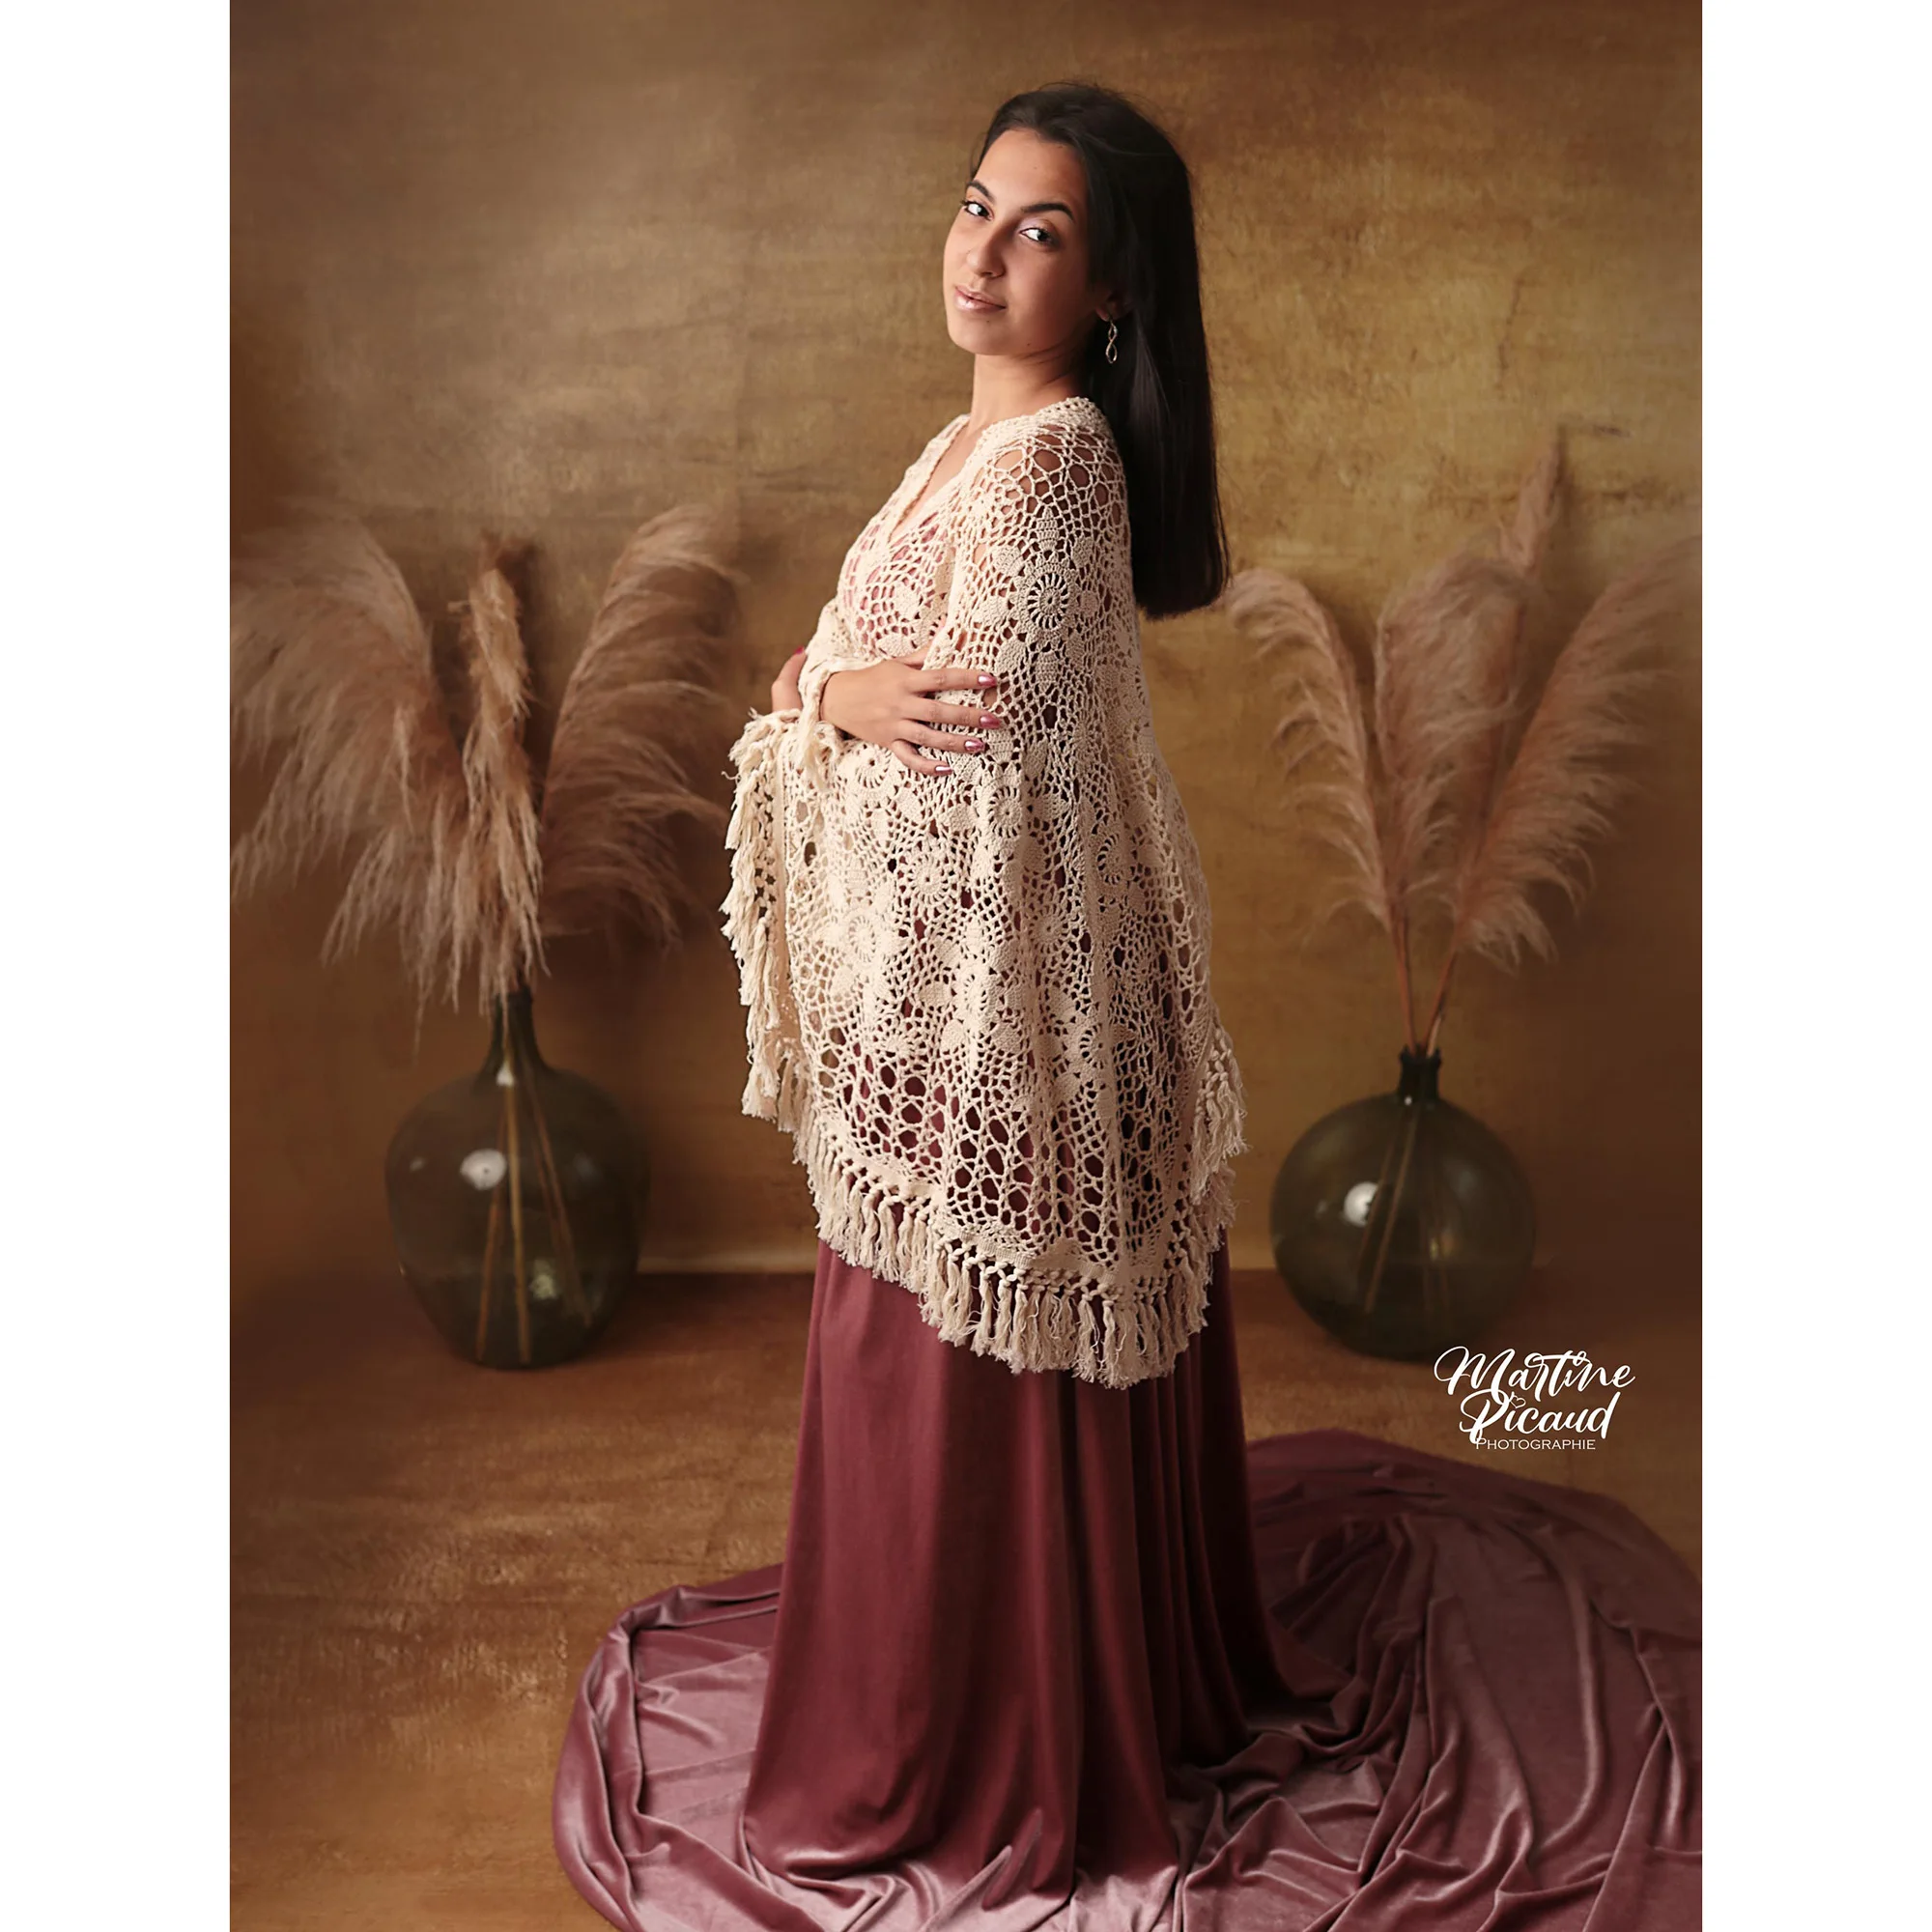 Photo Shoot Props Boho Hand Crochet Cotton Top Maternity Dress Pregnancy Velvet Gown for Woman Photography Robe Baby Shower Gift enlarge